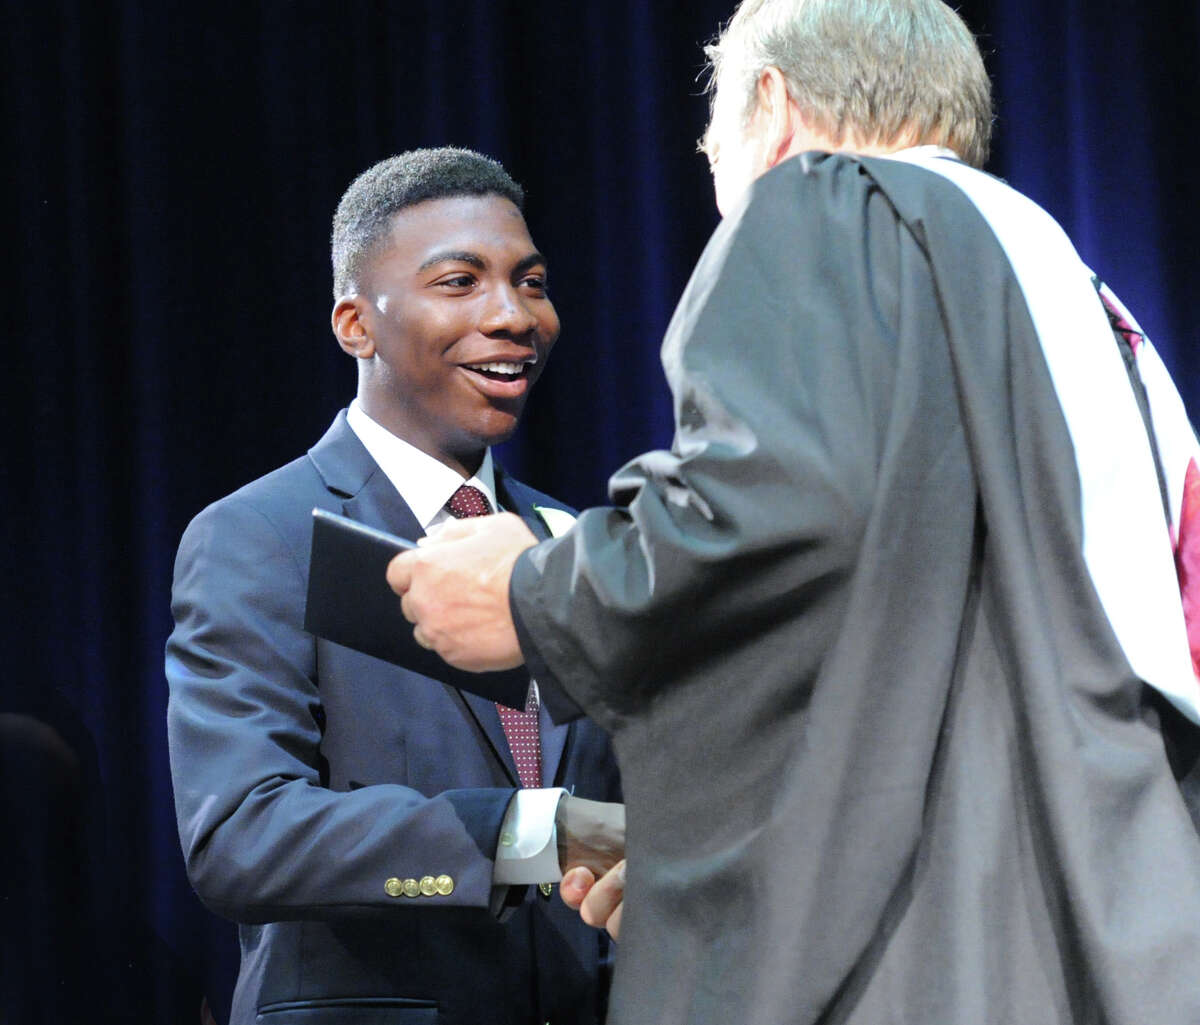 At left, Graduating senior, Michael McKelvie, Jr., receives his dipolma from Paul Geise, head of Stanwich School, during the commencement at the school in Greenwich, Conn., Thursday, May 28, 2015.